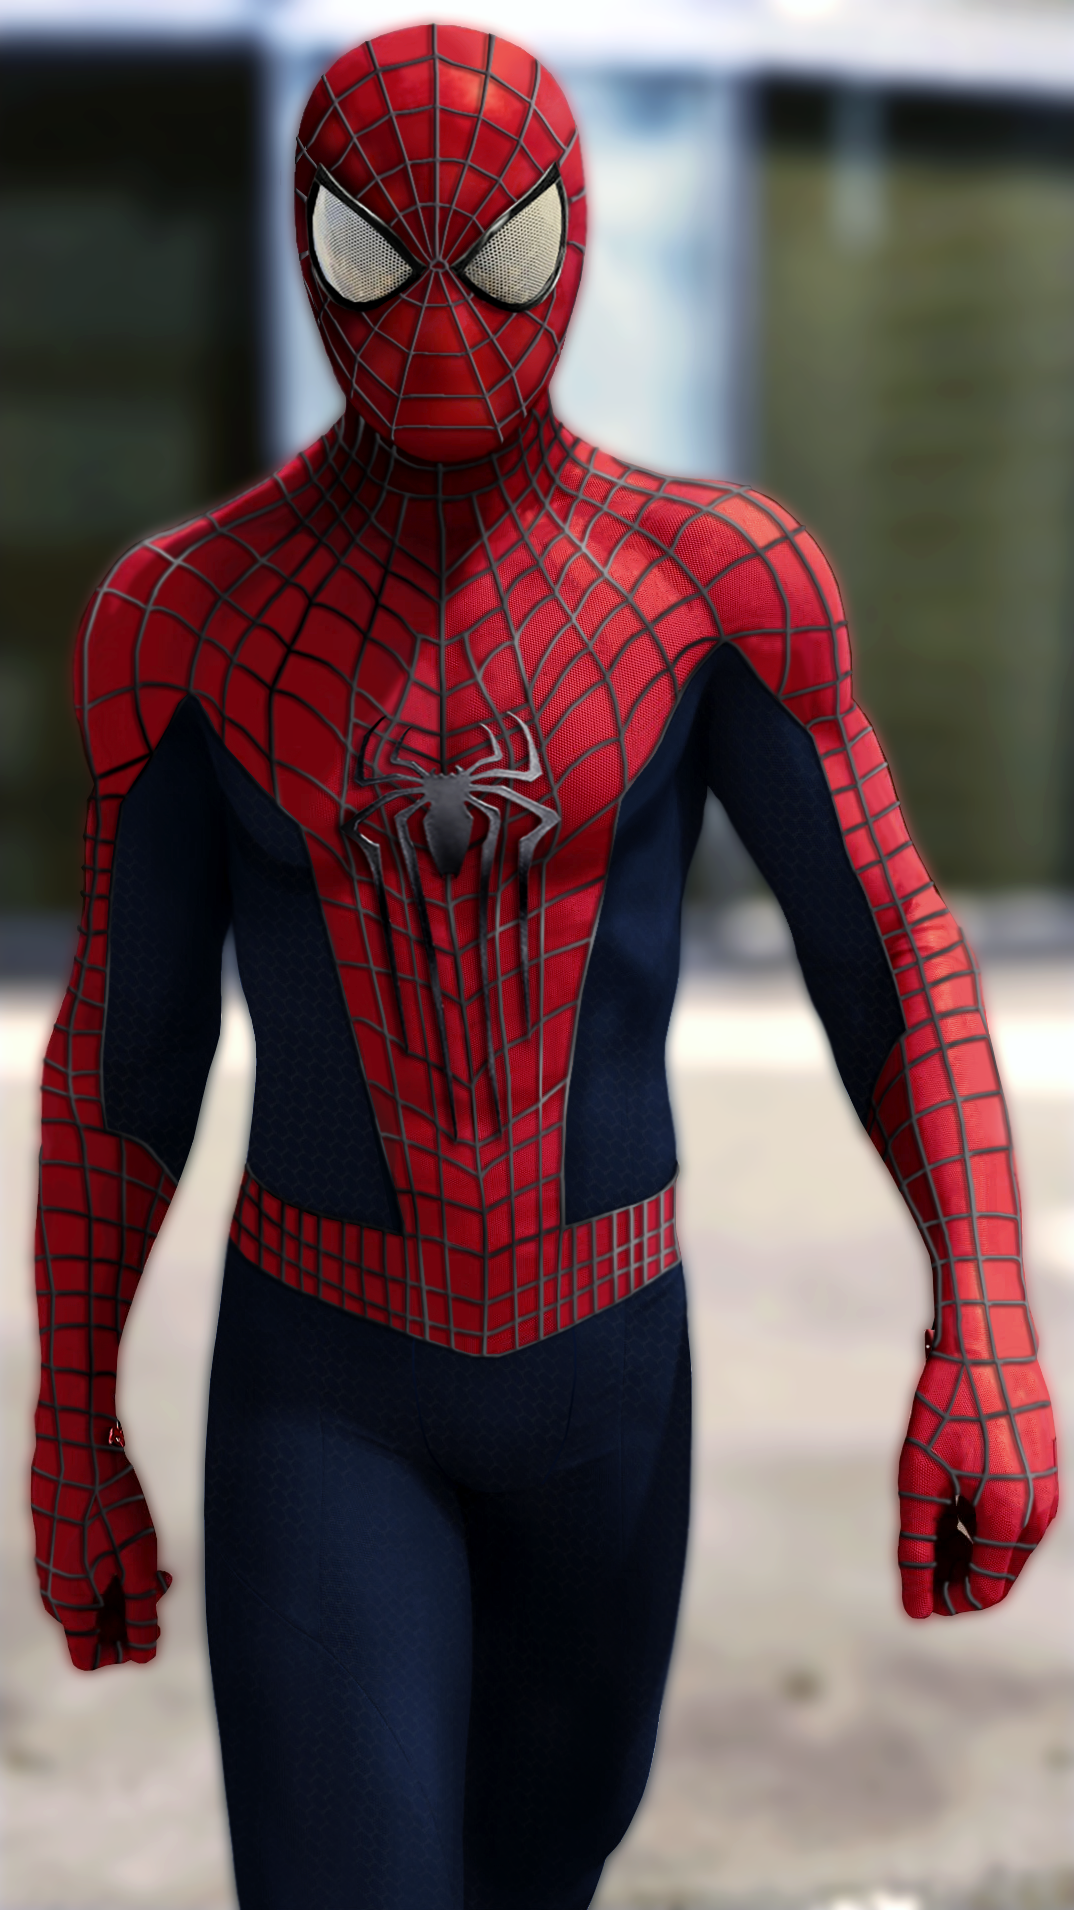 The Amazing Spider-Man 2 suit: PS4 skin by Soyelmejor999 on DeviantArt 